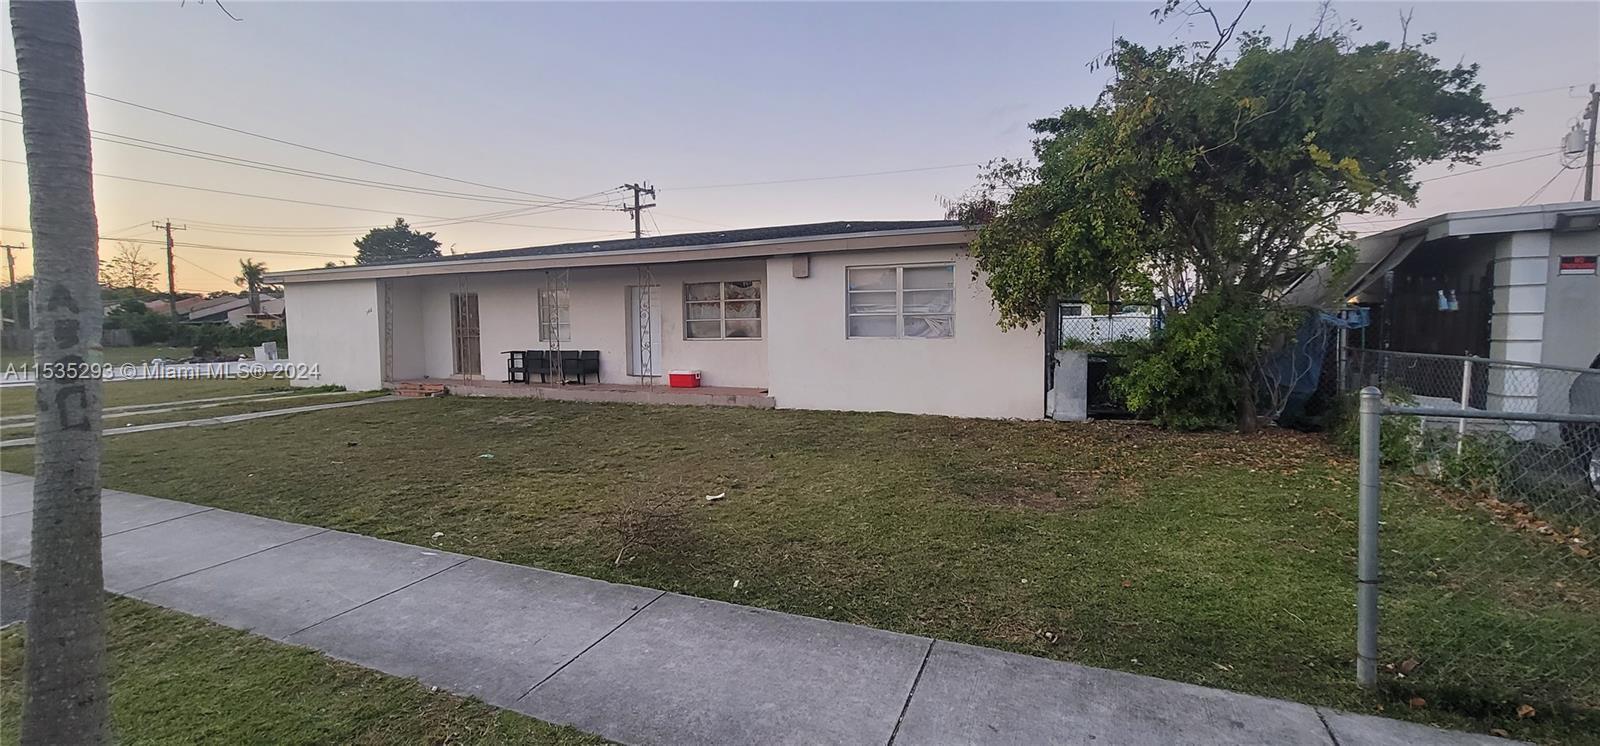 Photo of 540 NW 14th St in Florida City, FL